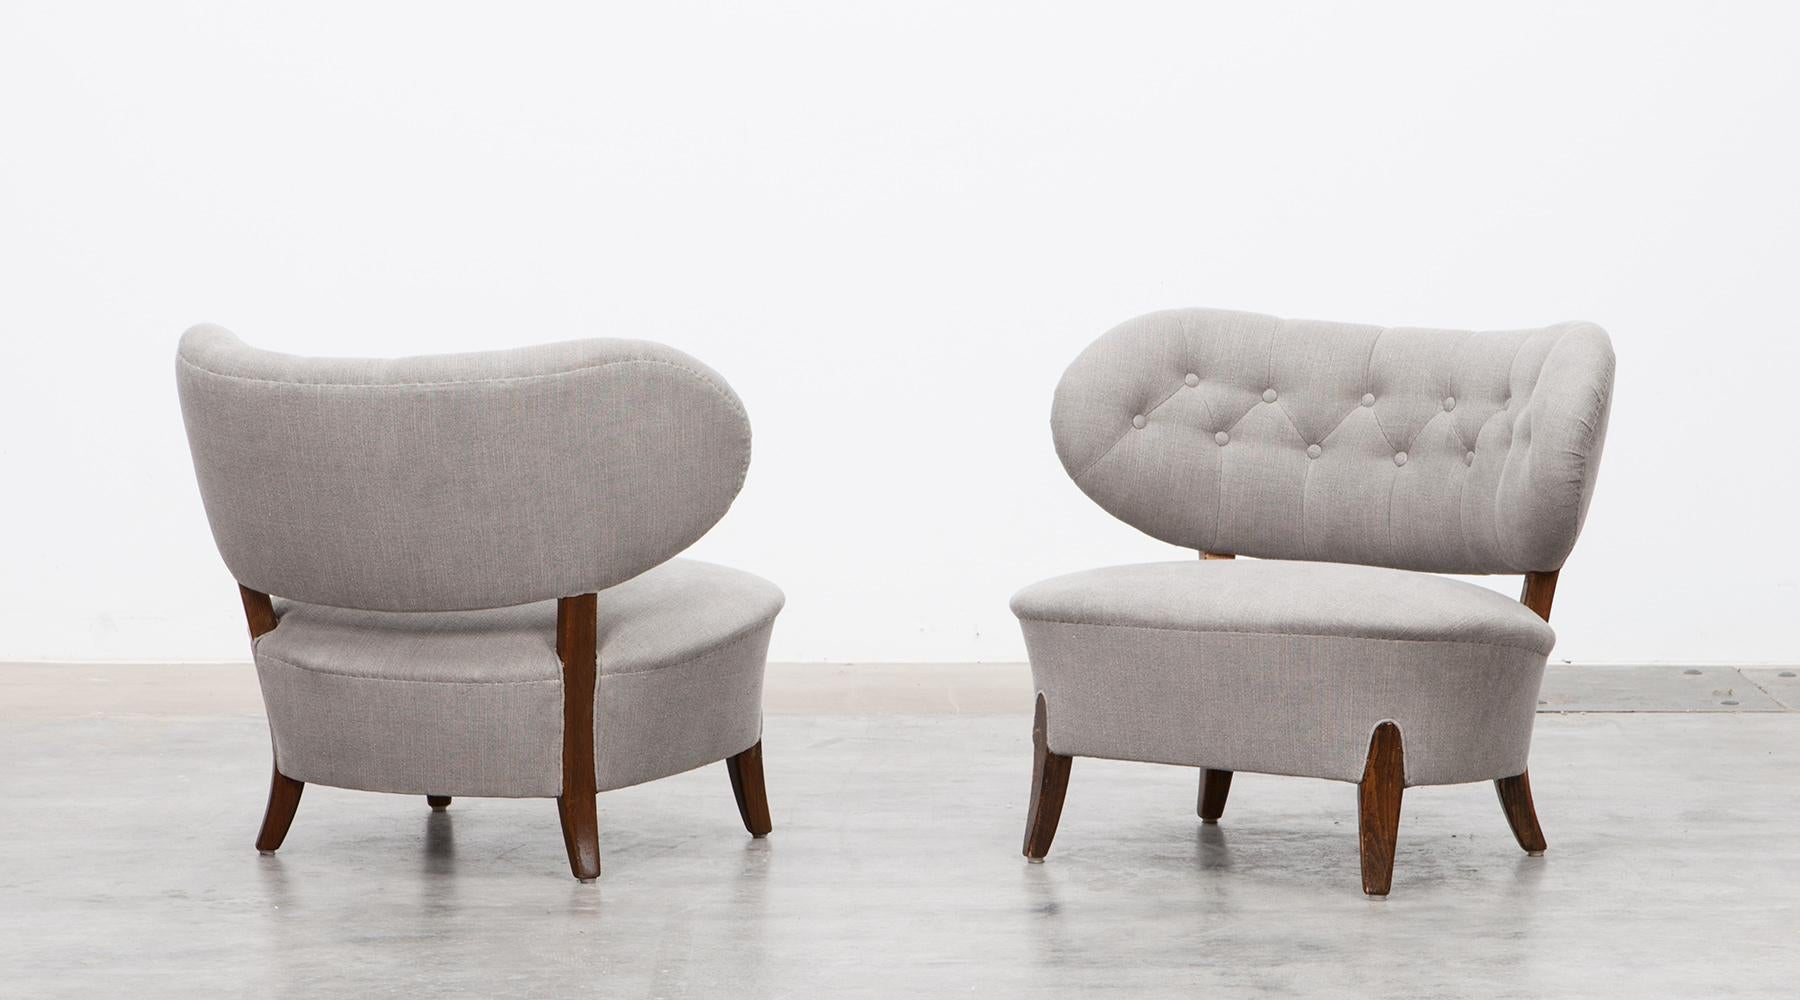 Otto Schulz for Boet, lounge chairs in ash newly upholstered, Sweden, 1963.

This beautiful pair of lounge chairs designed by Otto Schulz comes with a curved back decorated with buttons. Seat and back are newly upholstered, the frame and legs are